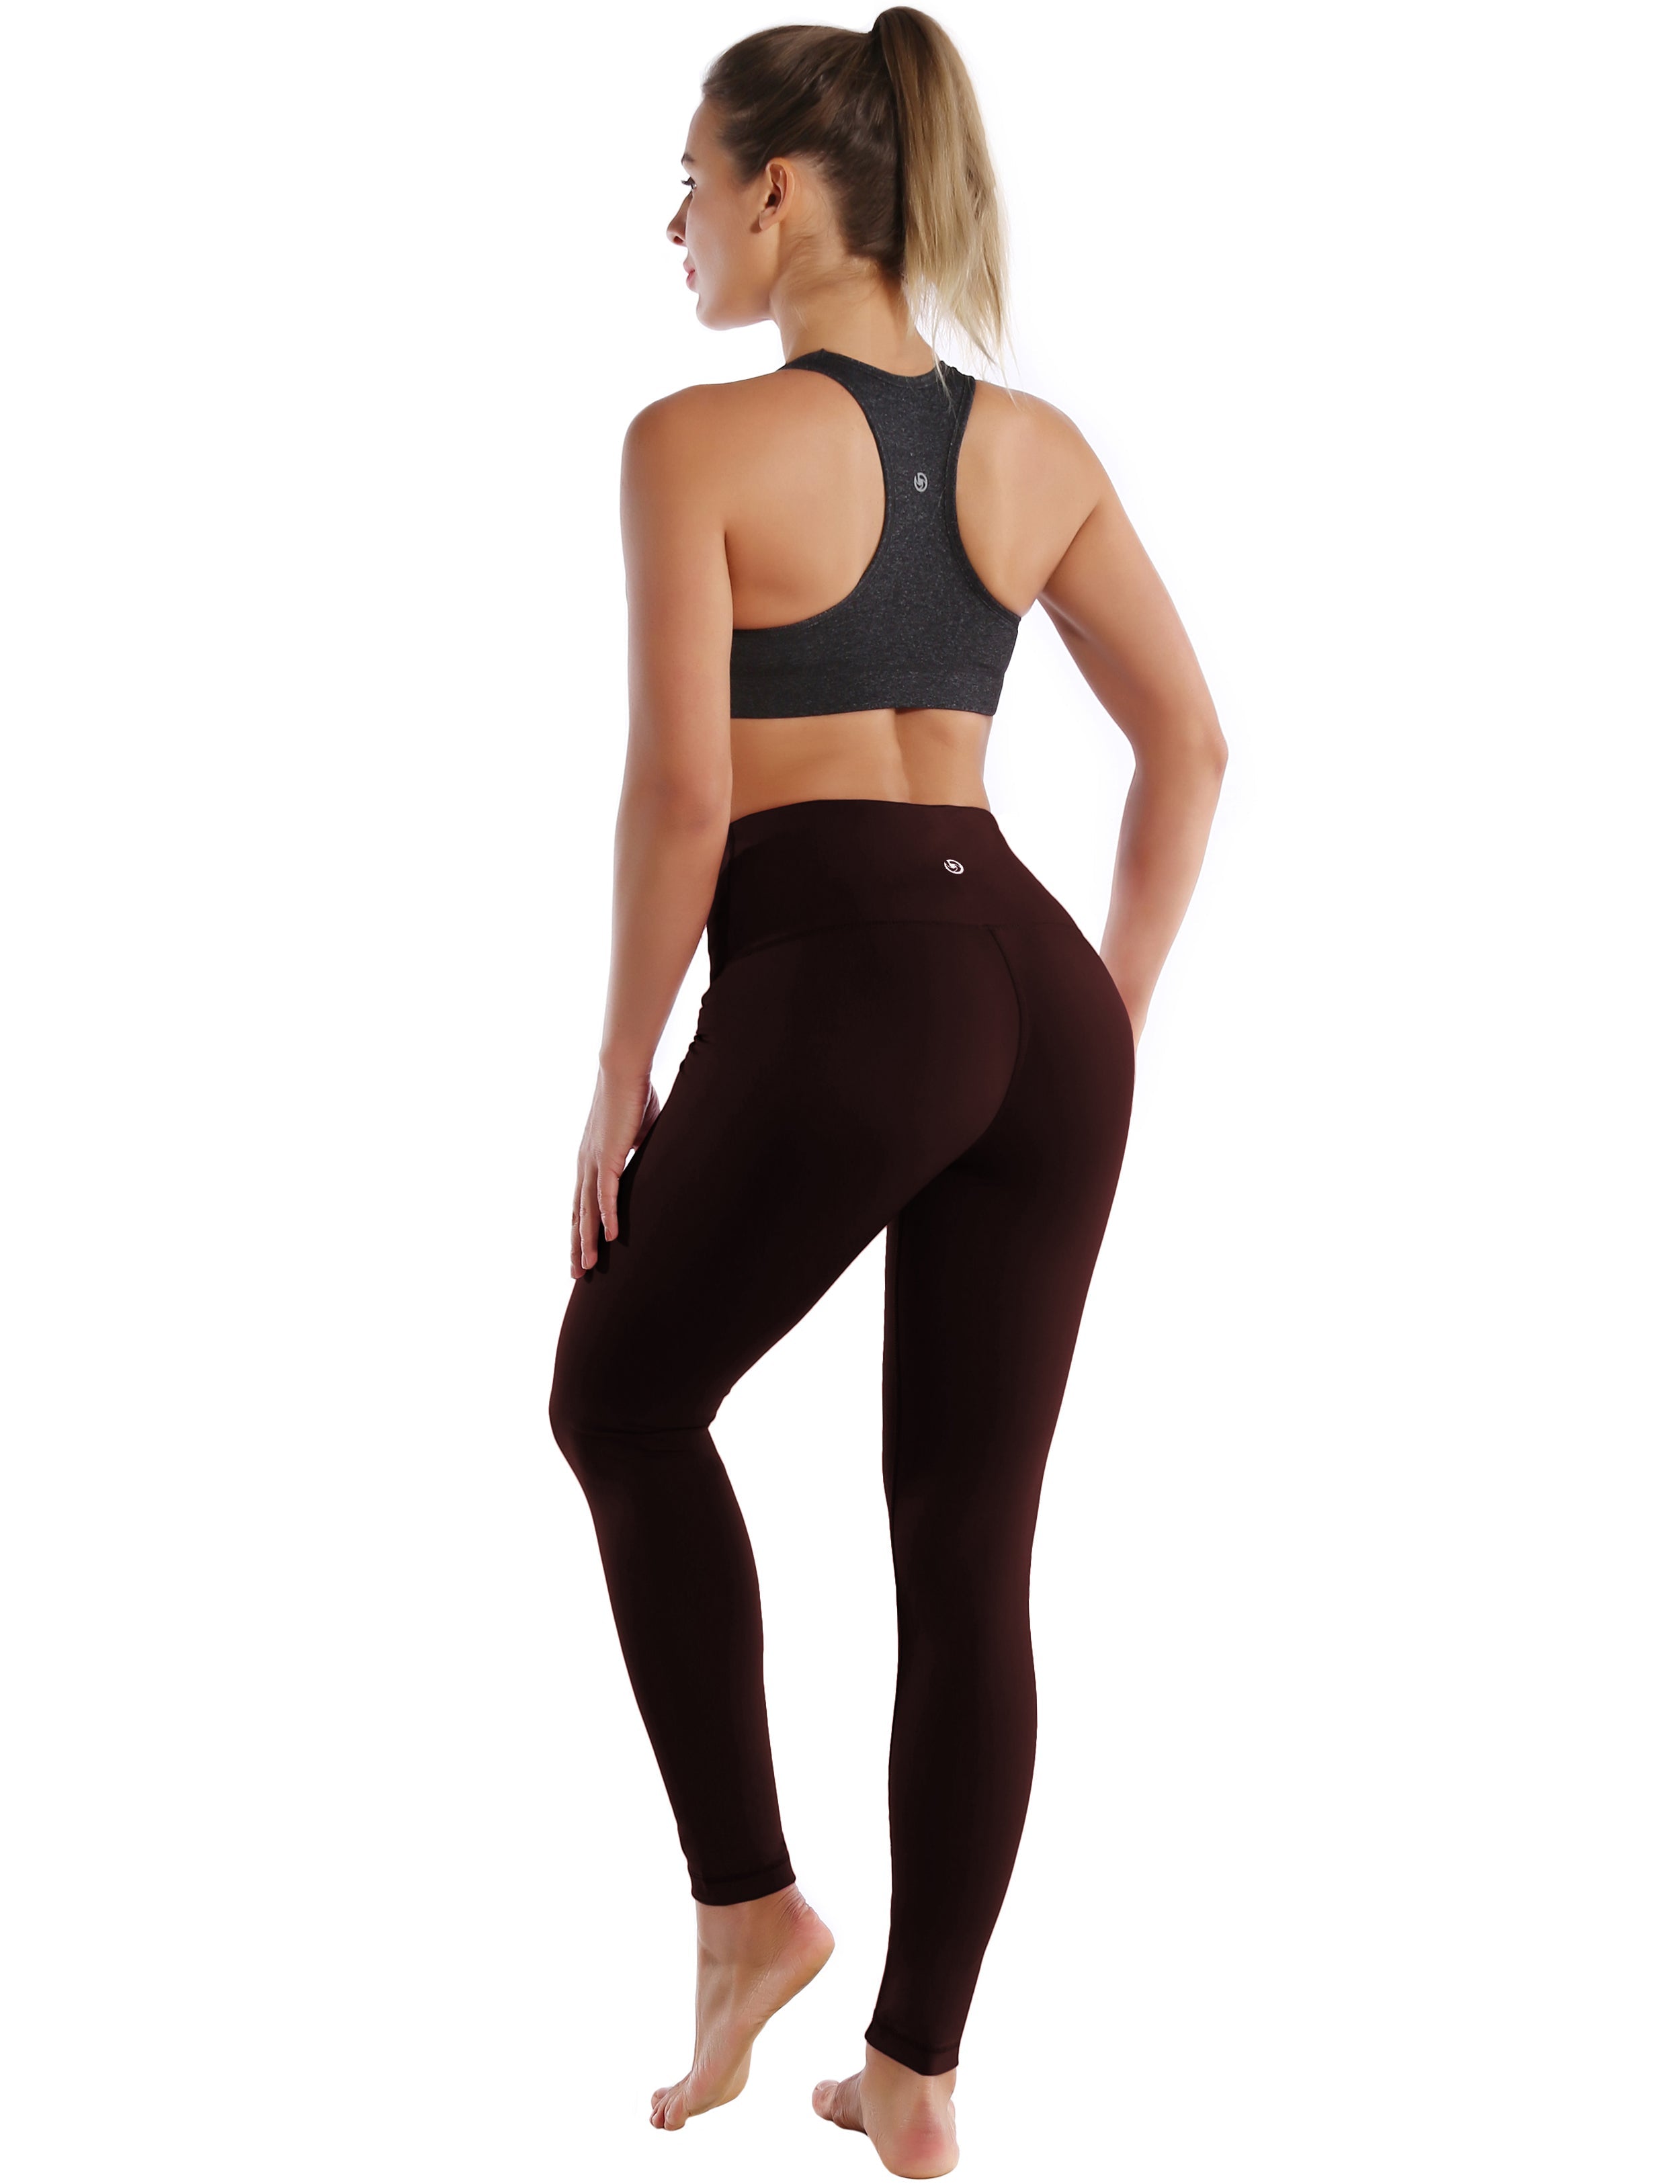 High Waist Running Pants mahoganymaroon 75%Nylon/25%Spandex Fabric doesn't attract lint easily 4-way stretch No see-through Moisture-wicking Tummy control Inner pocket Four lengths